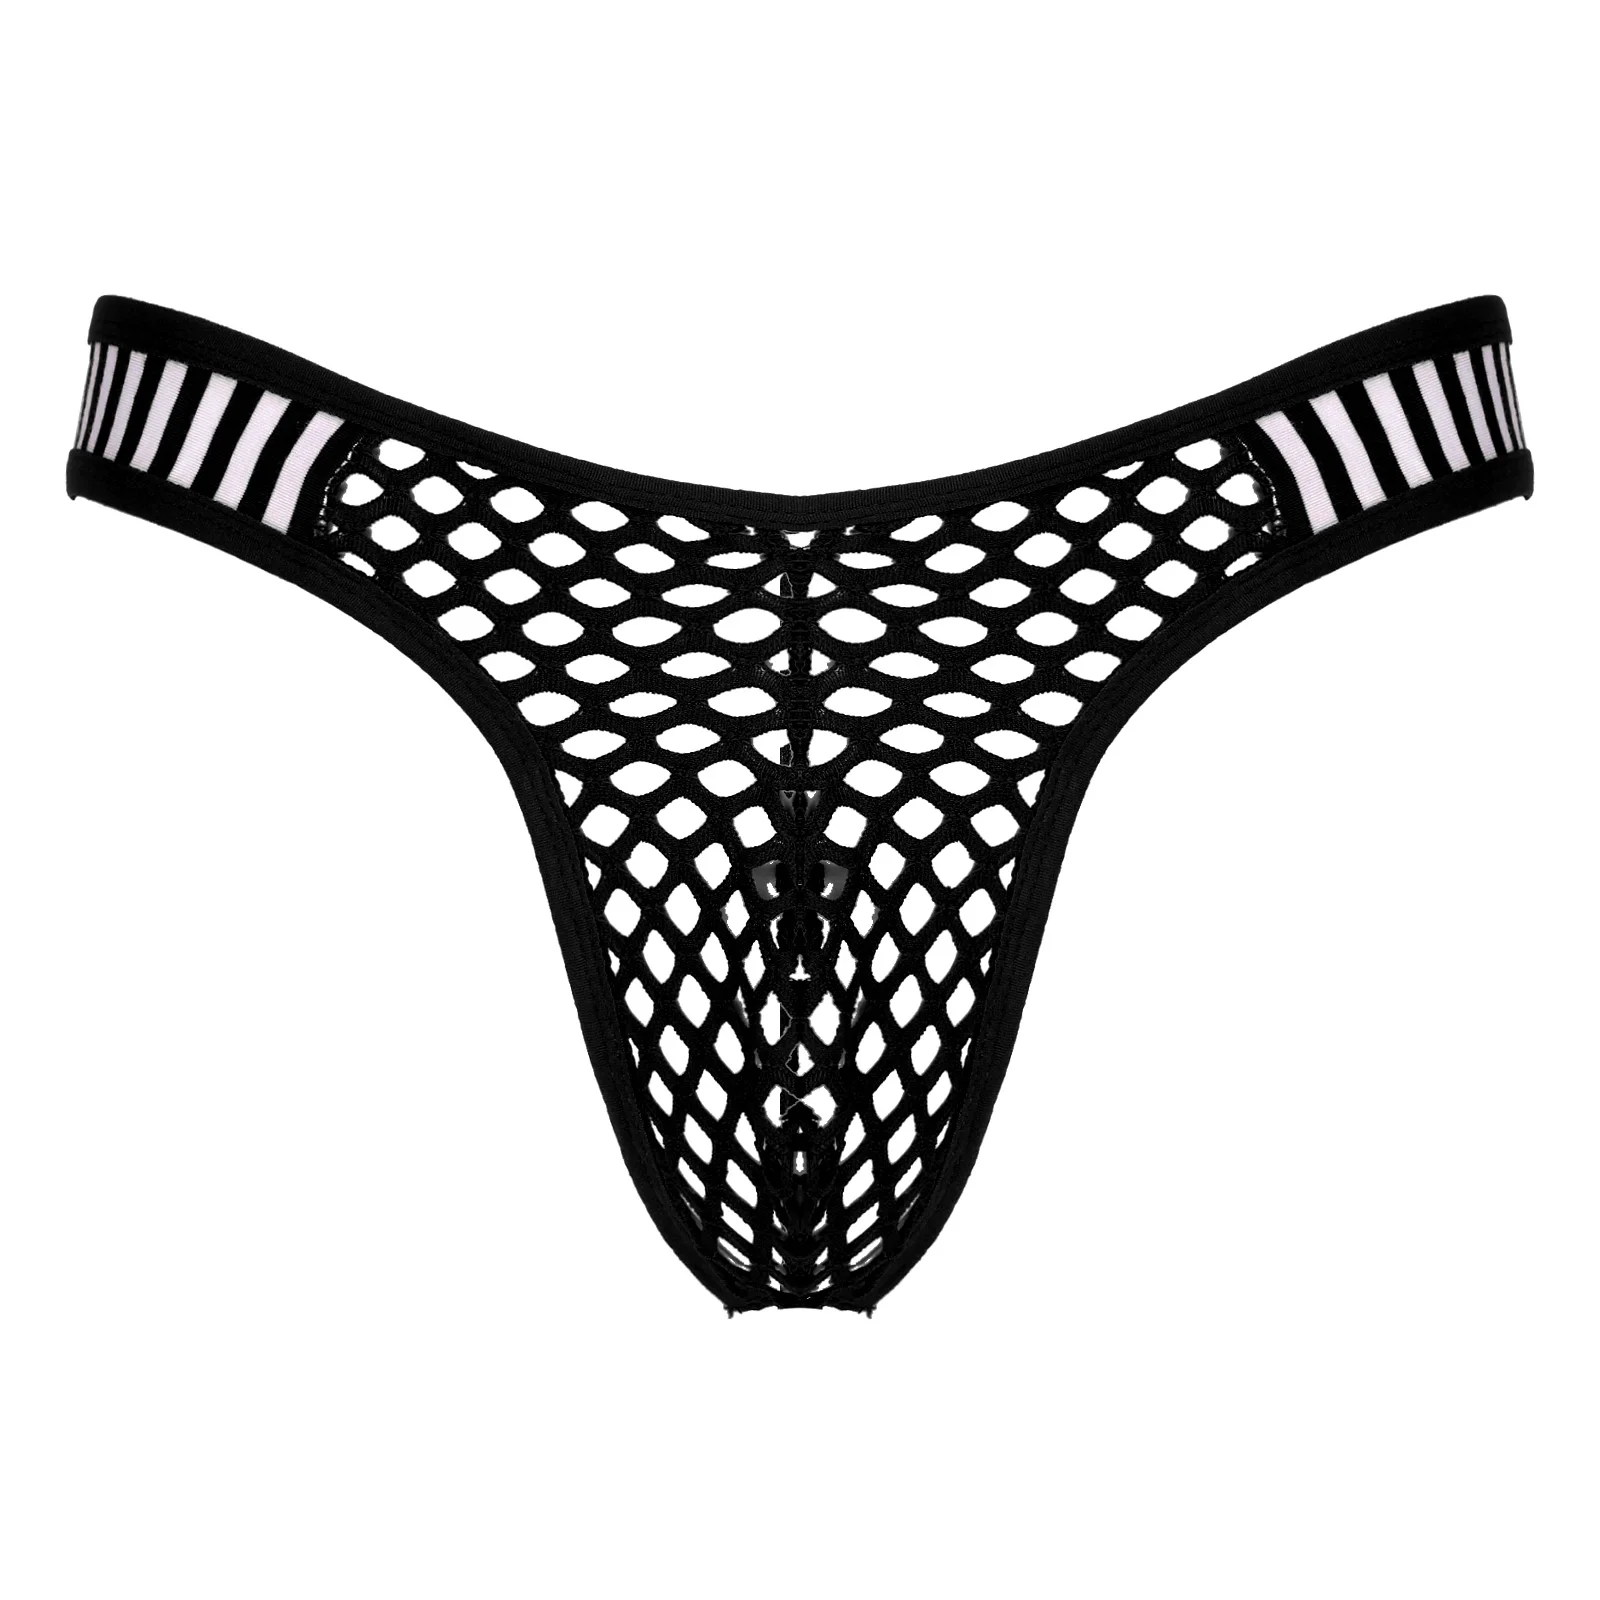 womens boxer shorts Men's Panties See-through Fishnet Briefs Low Waist Striped Elastic Waistband Thongs Hollow Out Bulge Pouch Underpants Underwear teddy lingerie